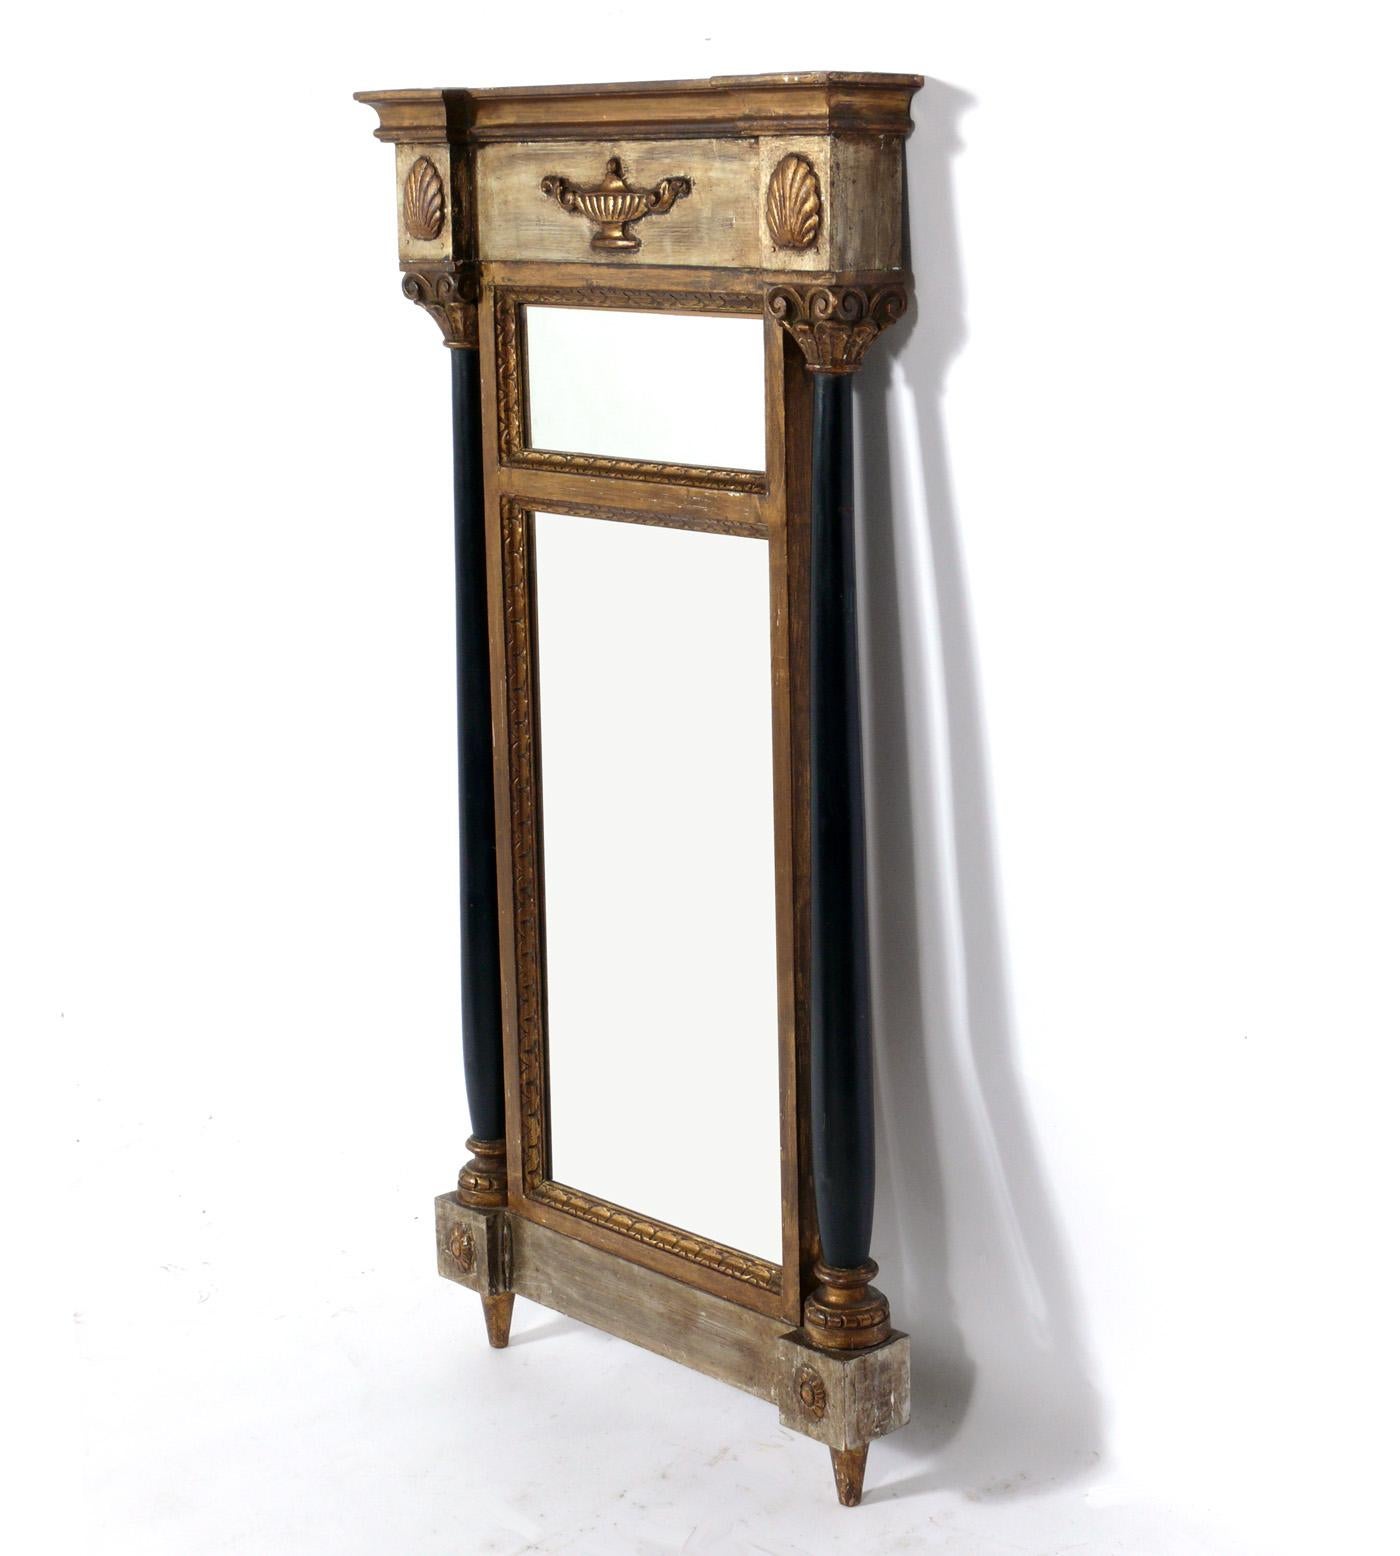 19th Century Italian Pier Mirror, Italy, circa 19th Century. Retains wonderful original patina to the parcel gilt and painted wood frame. Mirror has been replaced at some point. It measures an impressive 47.75